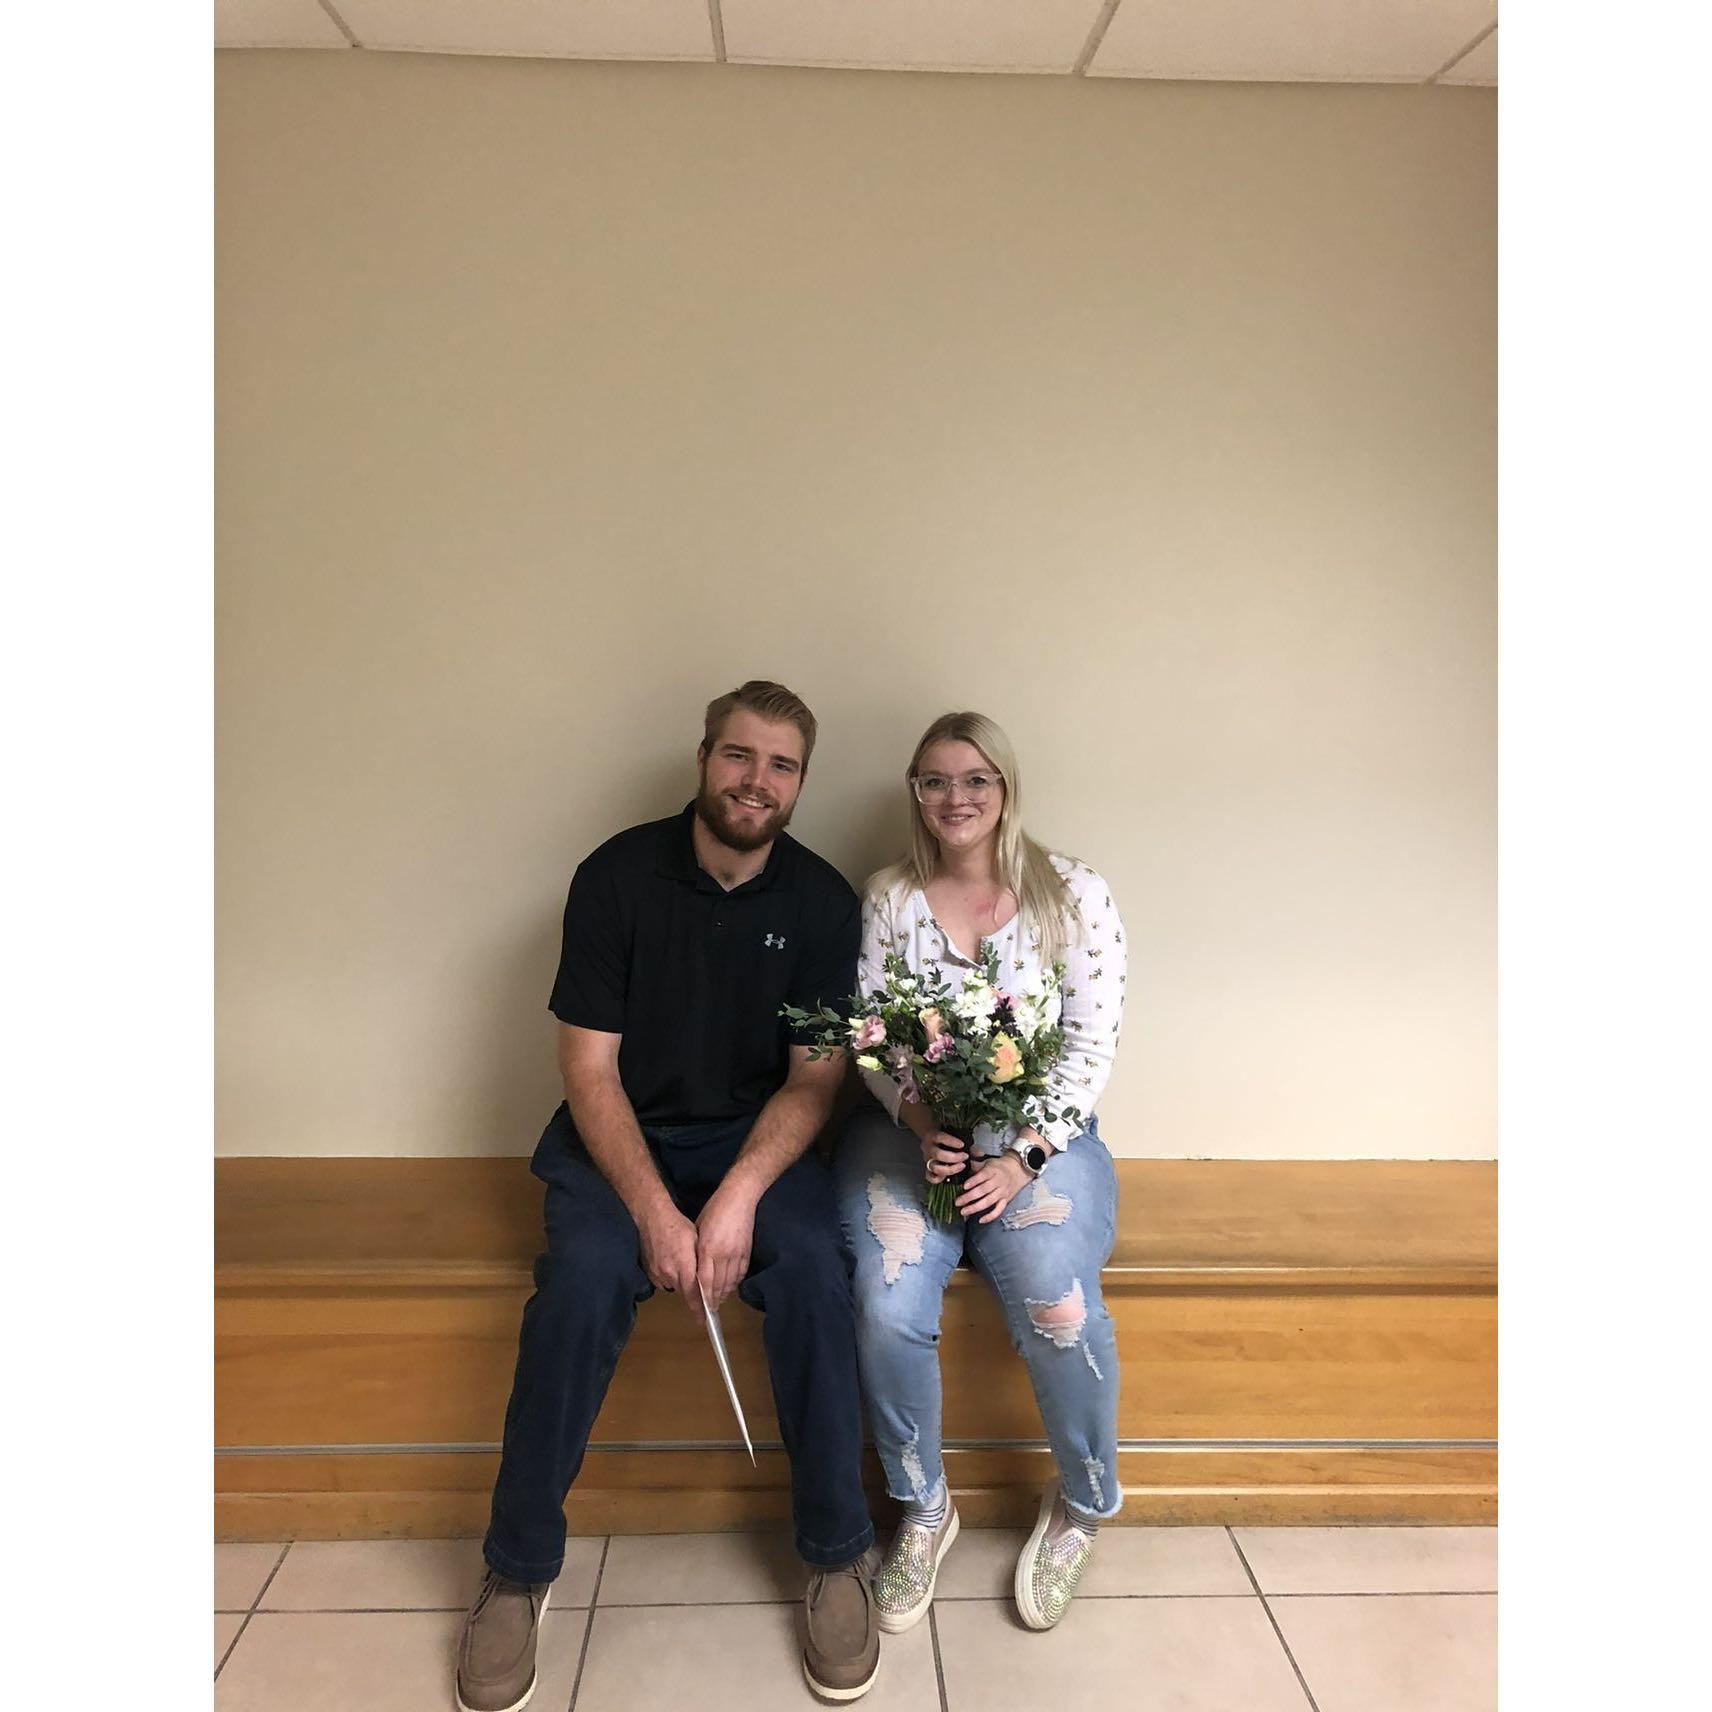 We eloped at the courthouse in West Virginia on December 13th 2022. True love just couldn't wait and we said "I do!" Look how cute we are